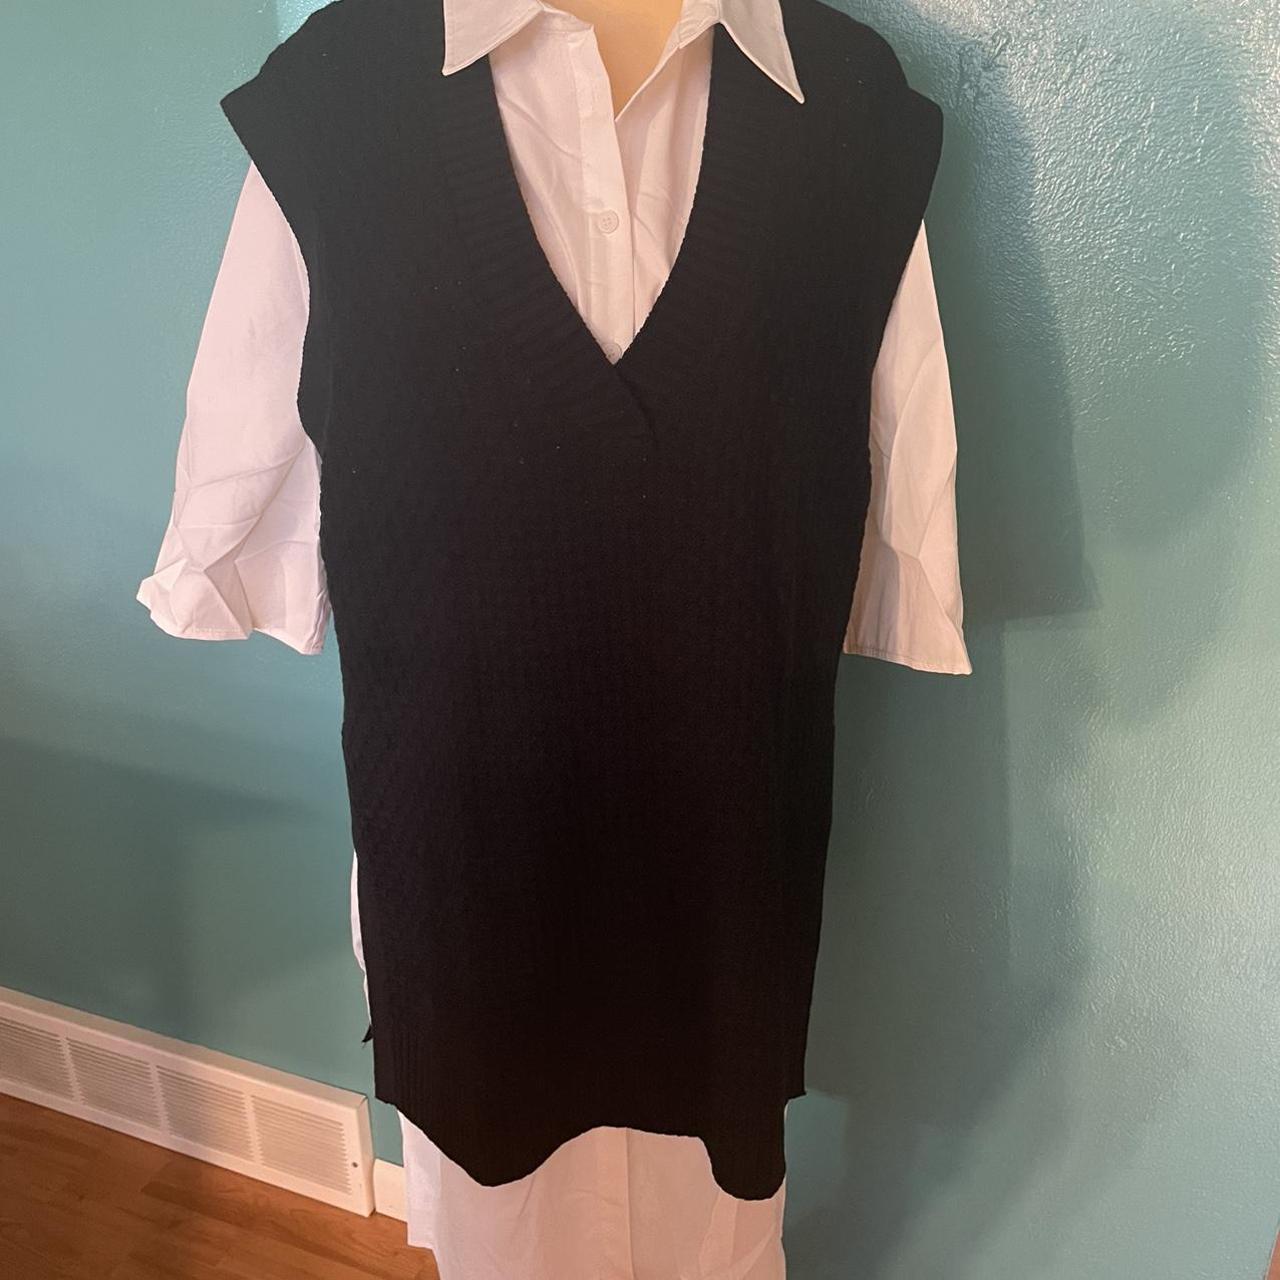 Product Image 2 - Long length sweater vest
ELOQUII brand
Size